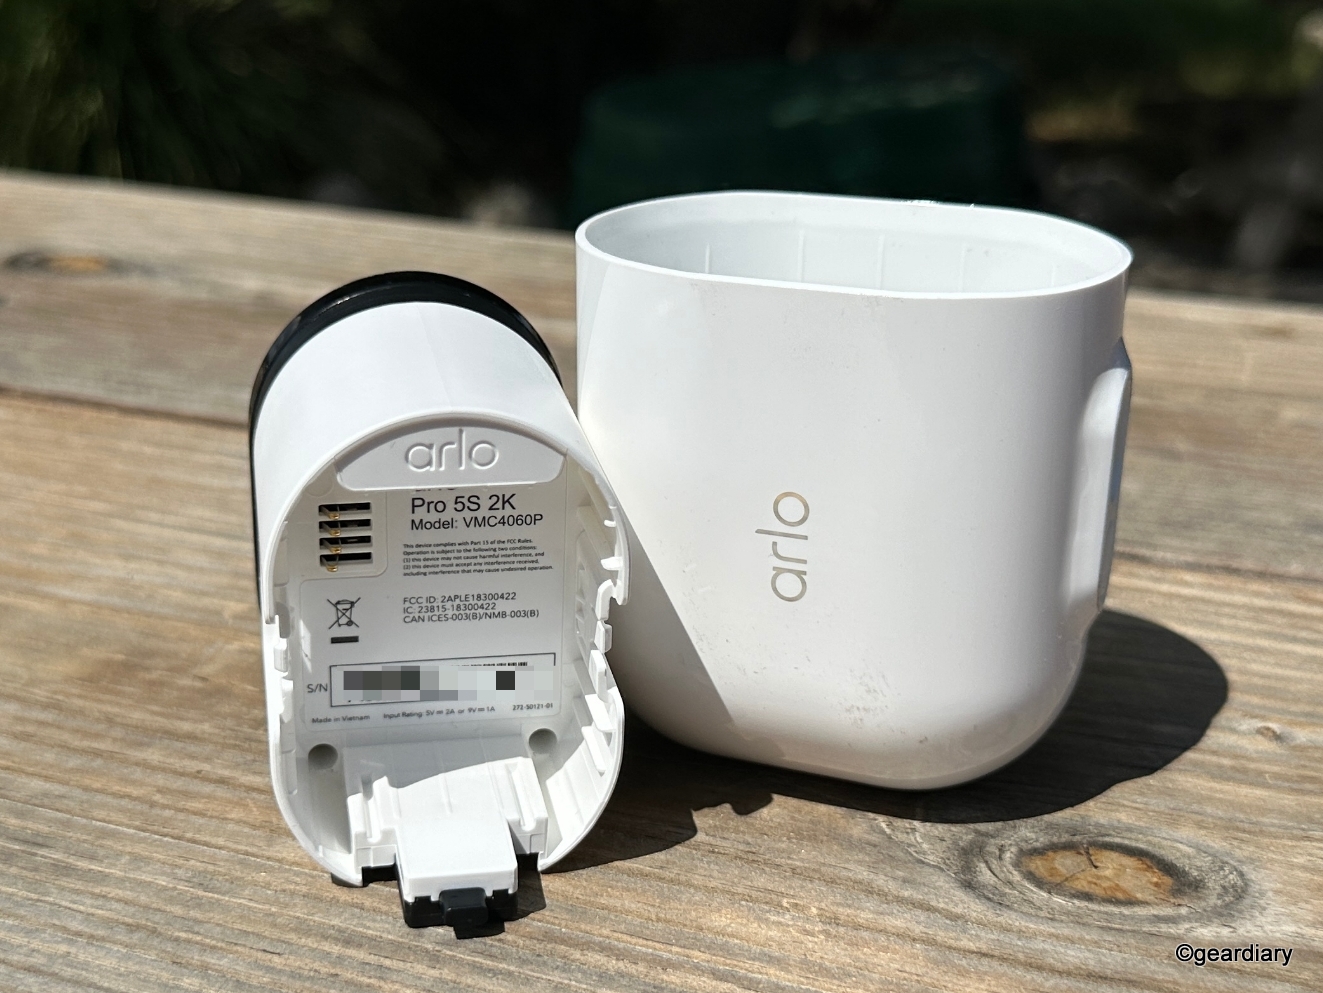 Battery compartment on the Arlo Pro 5S 2K Wireless Security Camera